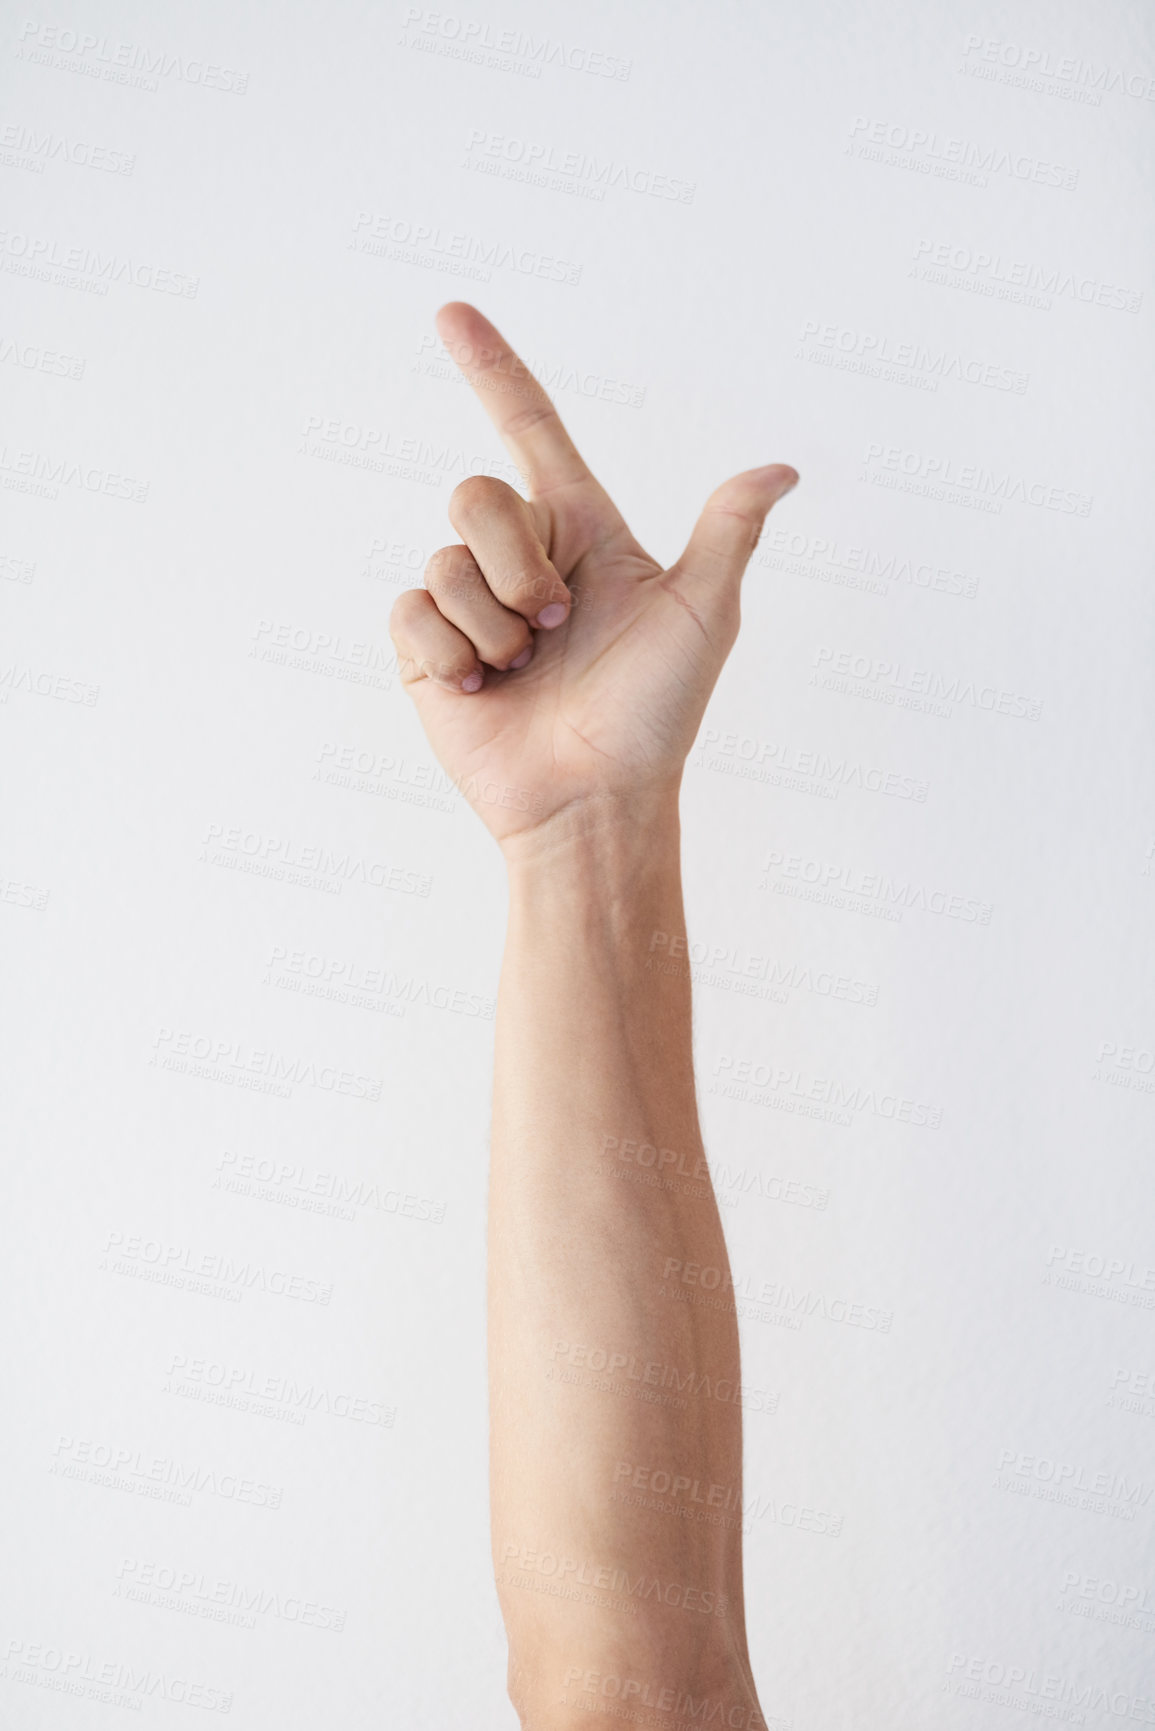 Buy stock photo Cropped shot of a unrecognizable person's hands against a grey background showing a letter 